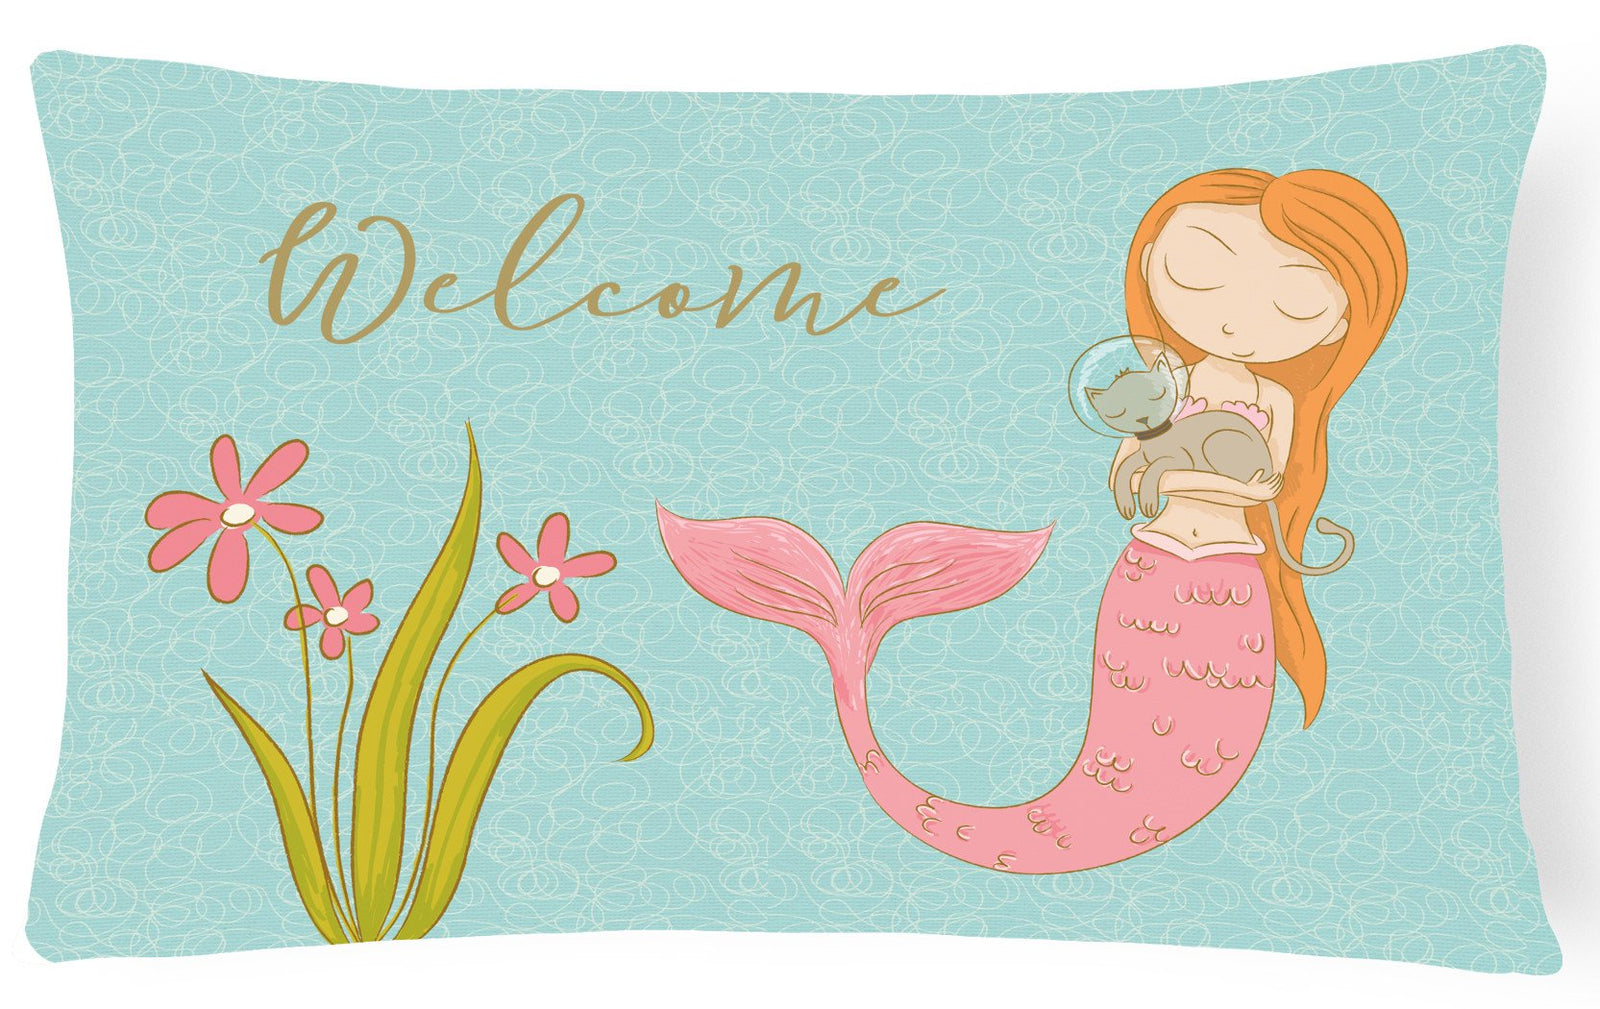 Mermaid with Cat Welcome Canvas Fabric Decorative Pillow BB8548PW1216 by Caroline's Treasures